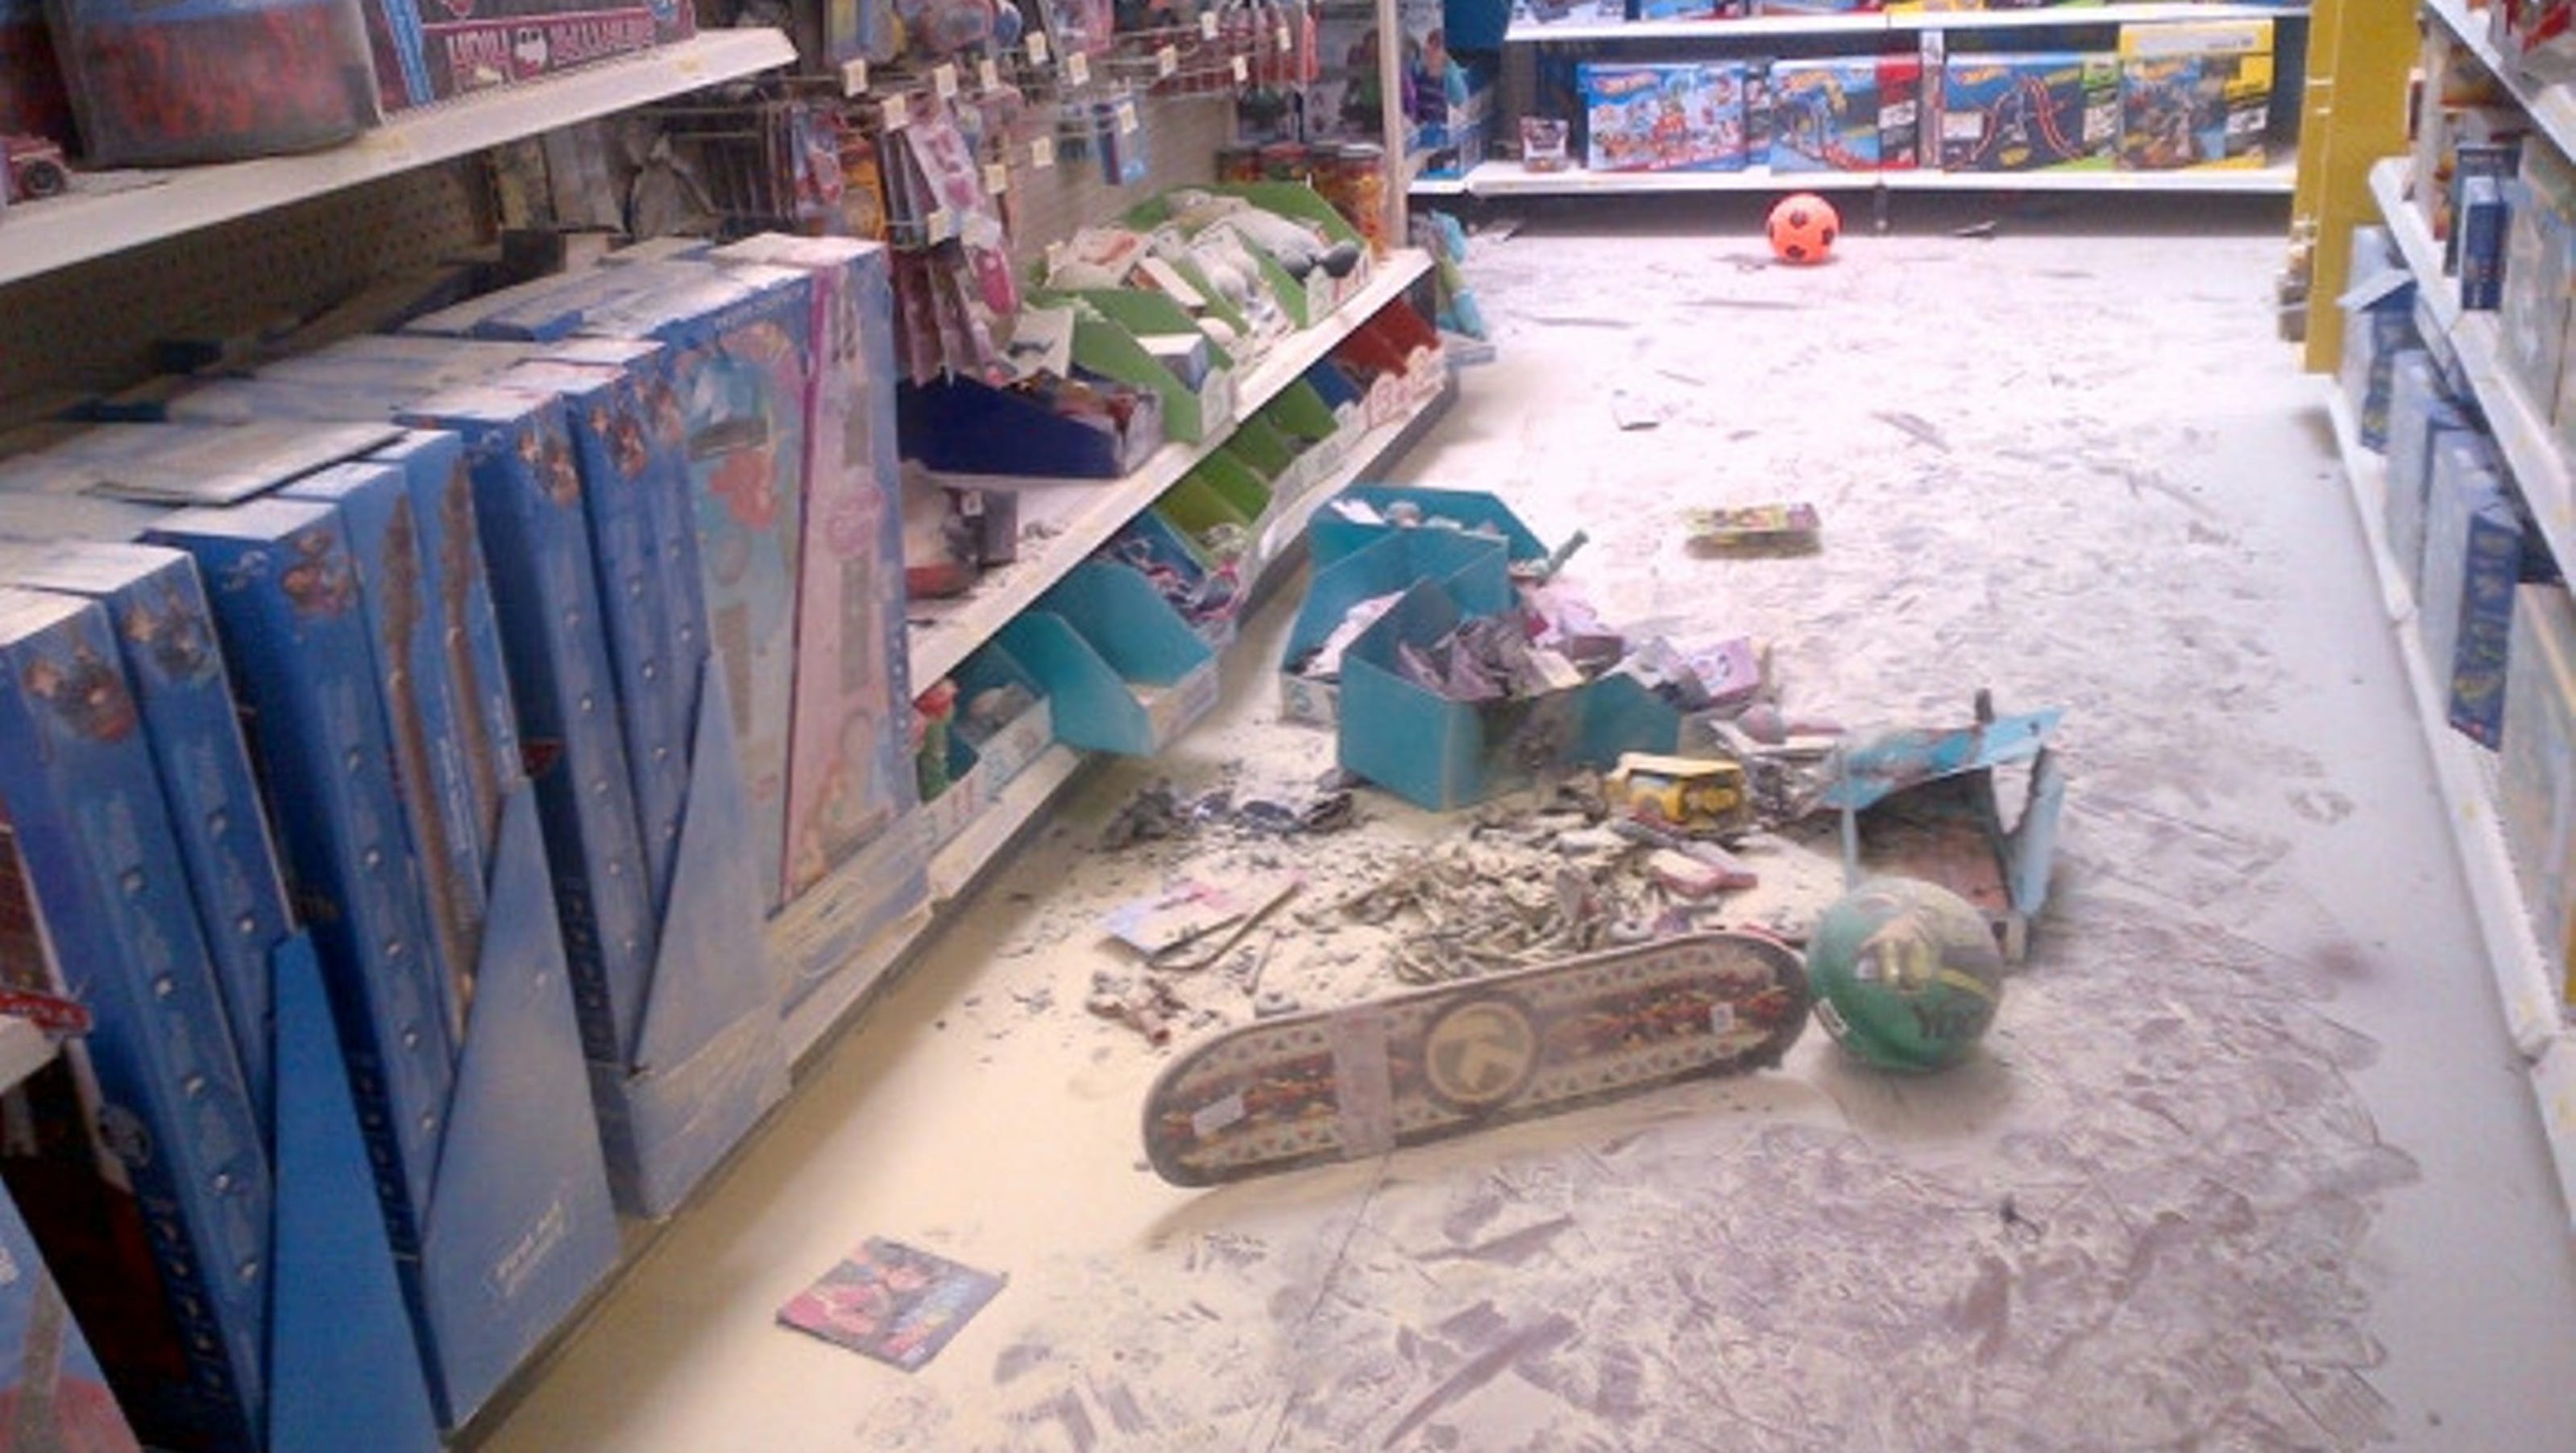 Child starts fire in Walmart toy section - WXIA-TV ...